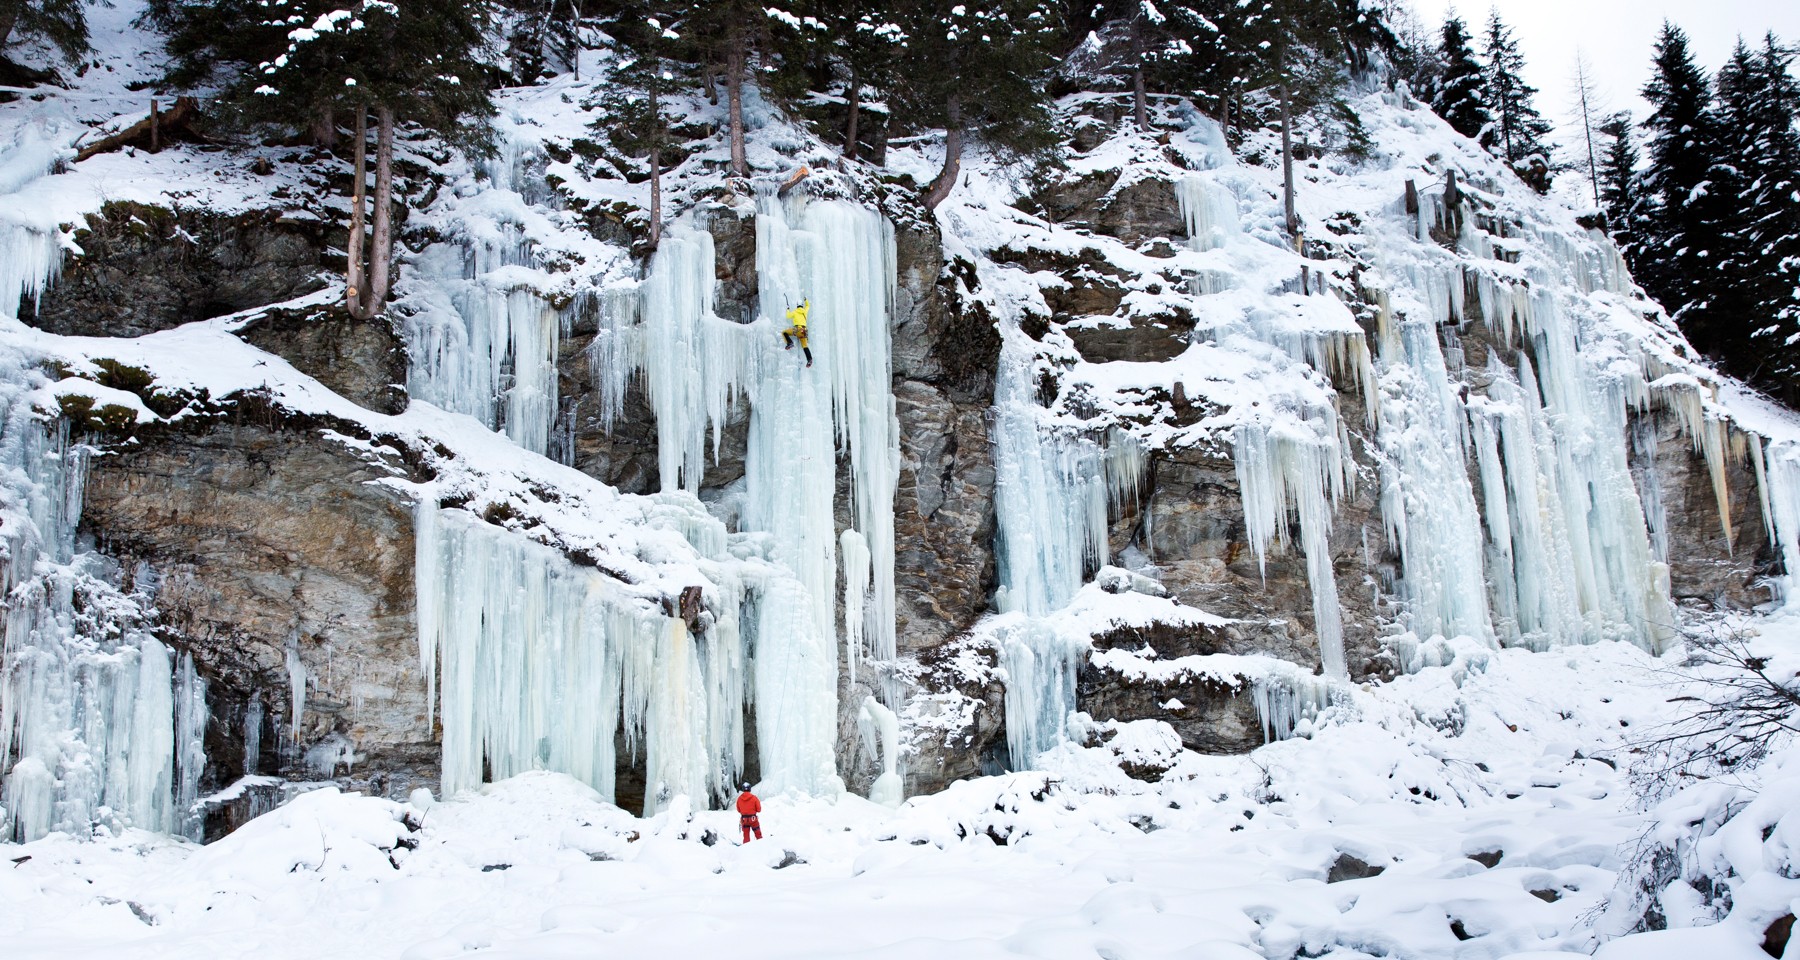 Ice climbing course for advanced Climbers